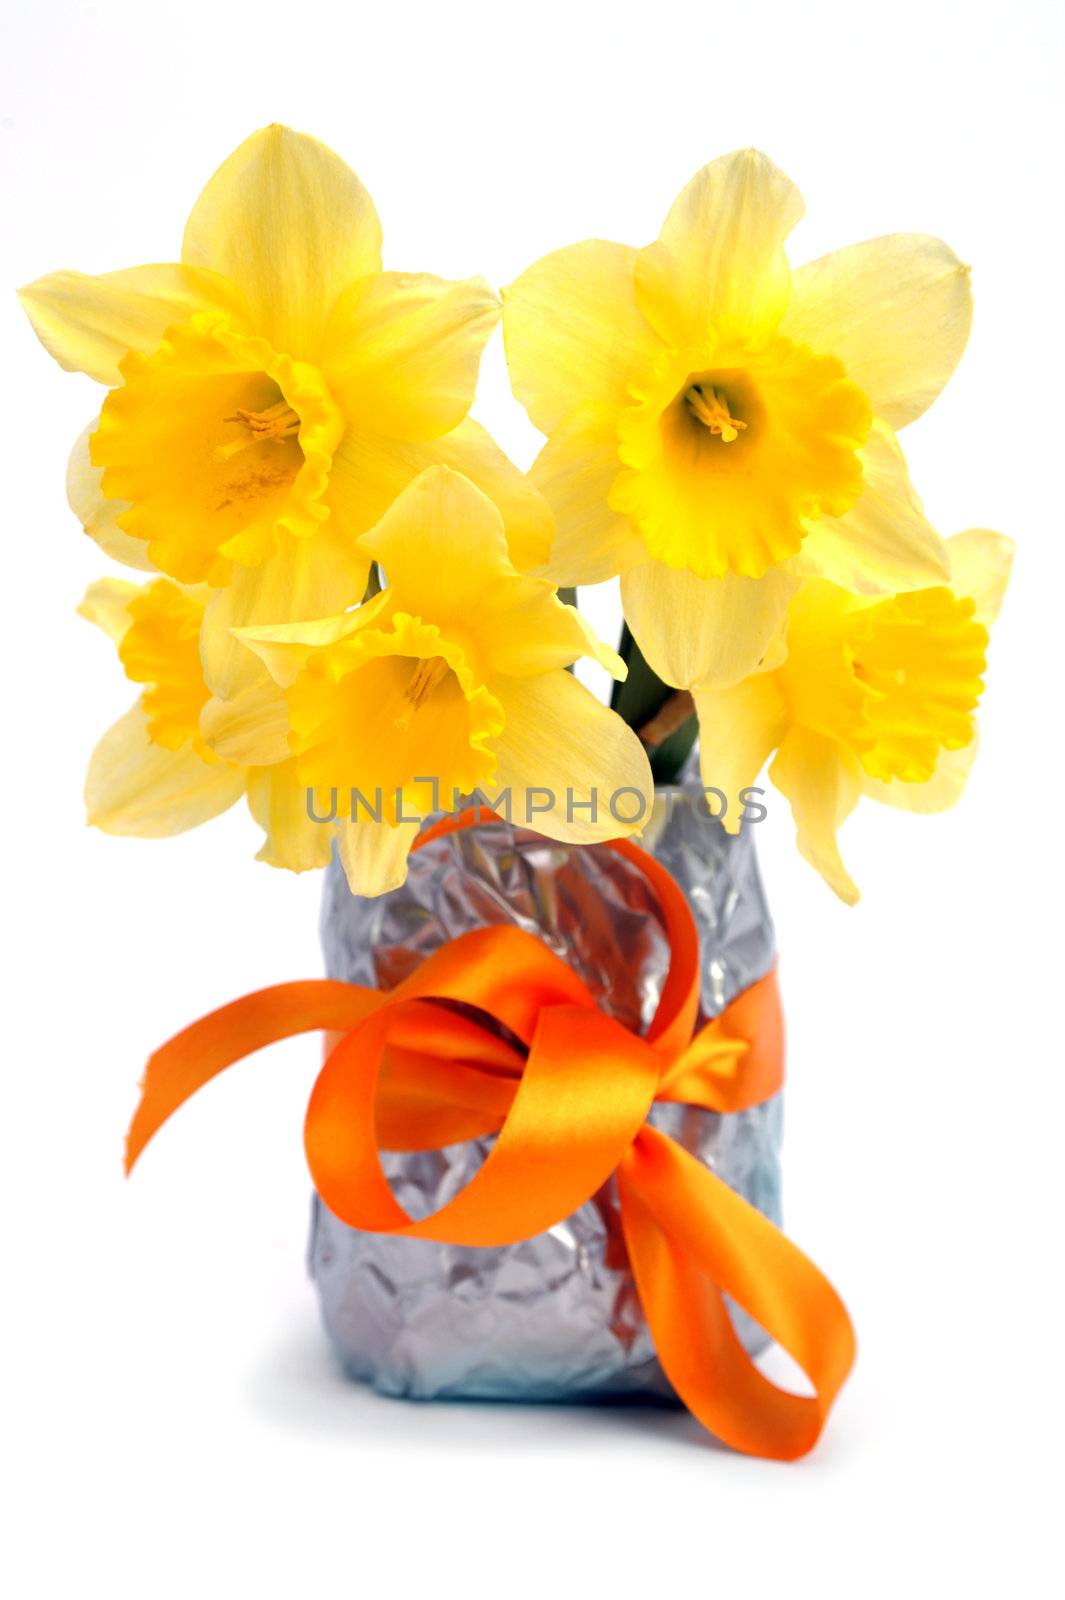 An image of yellow daffodils in a vase